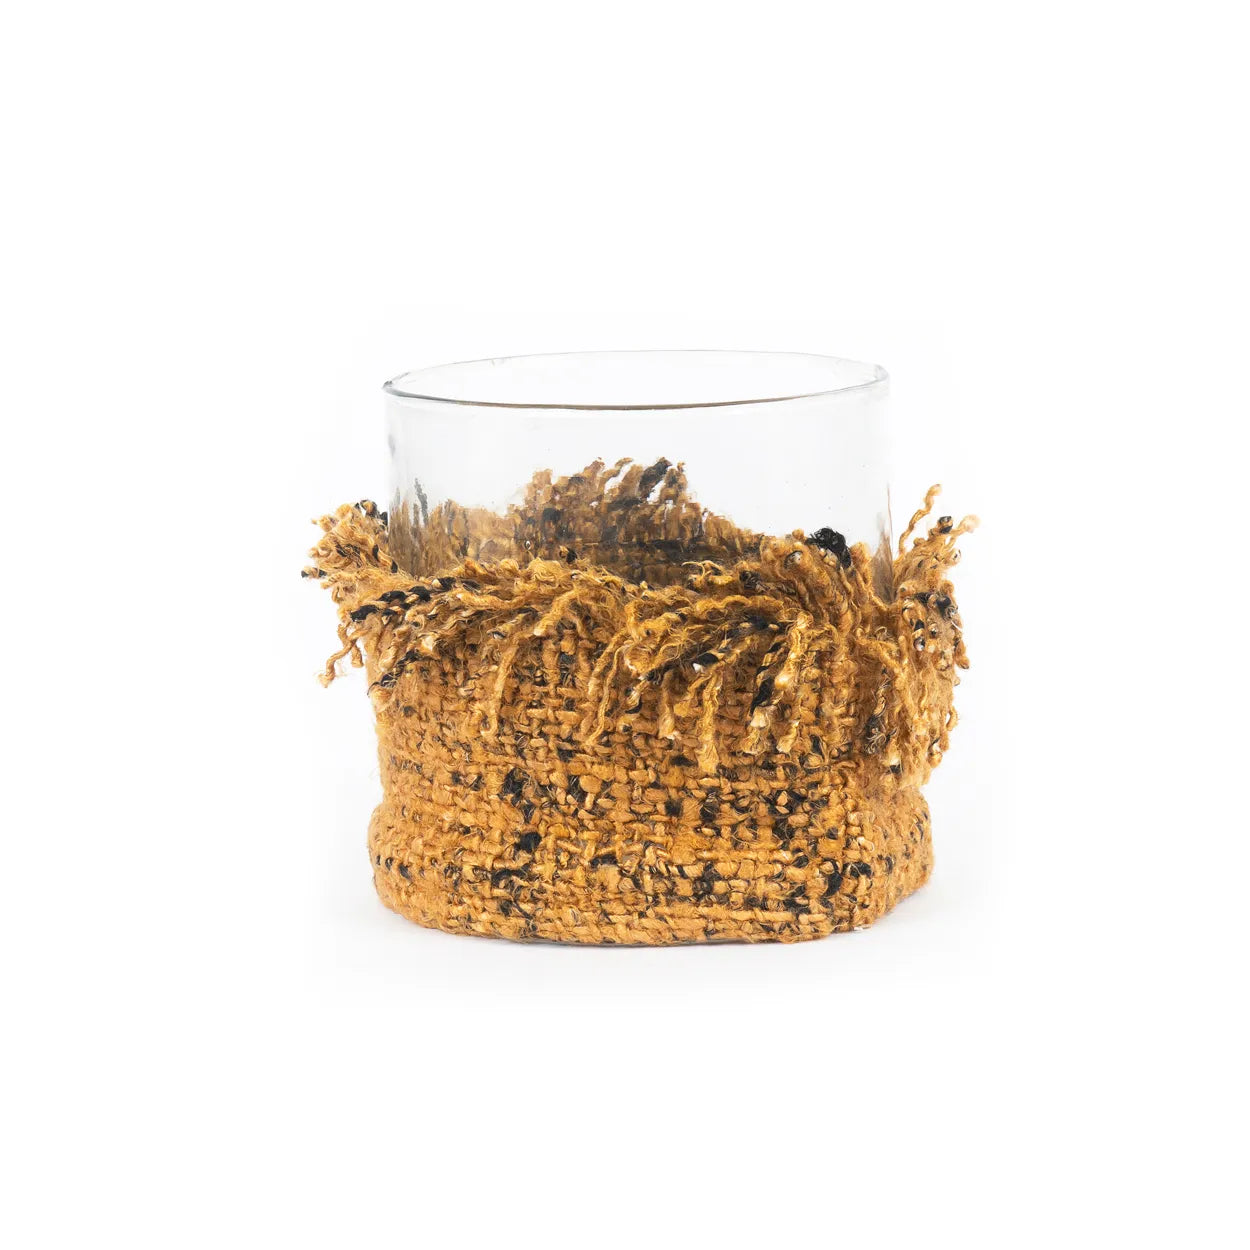 Cadaques Charm Holder - Glass Candle Accessory